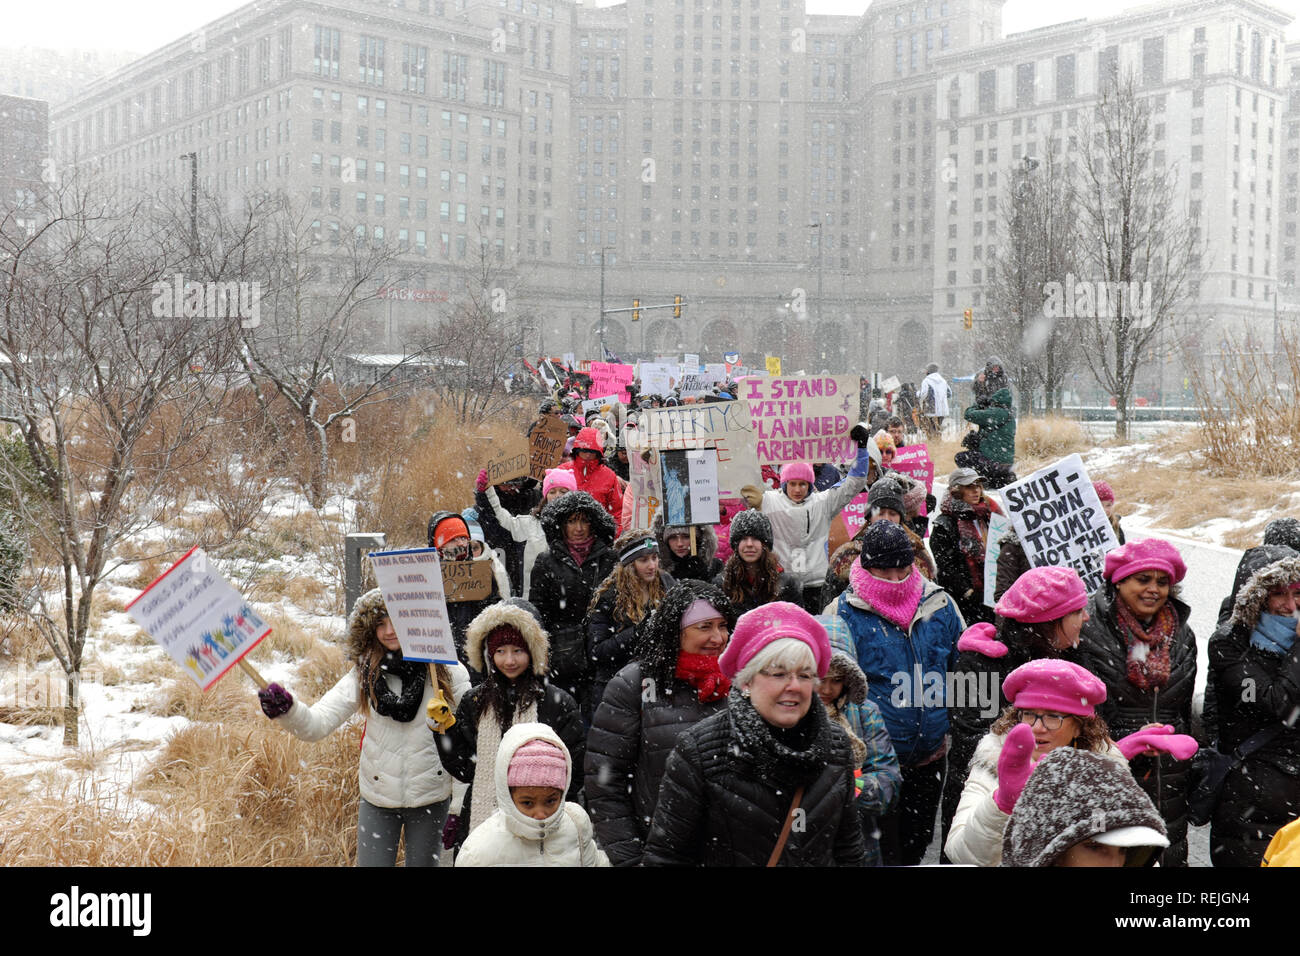 2019 Women's March participants rally on Public Square in downtown Cleveland, Ohio, USA during a winter snowstorm. Stock Photo